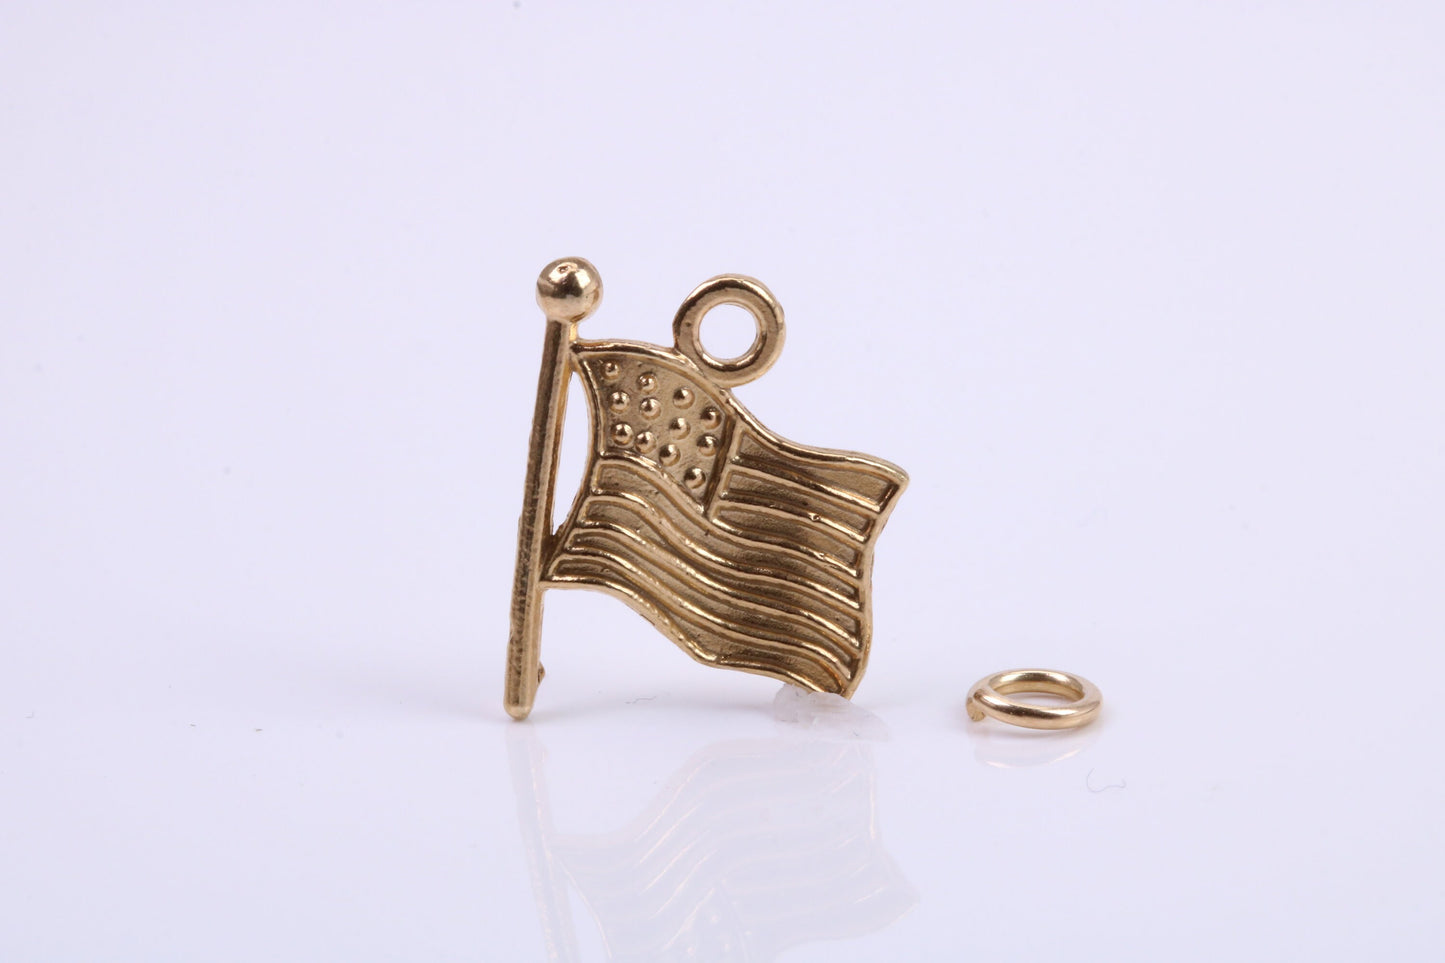 USA Flag Charm, Traditional Charm, Made from Solid 9ct Yellow Gold, British Hallmarked, Complete with Attachment Link